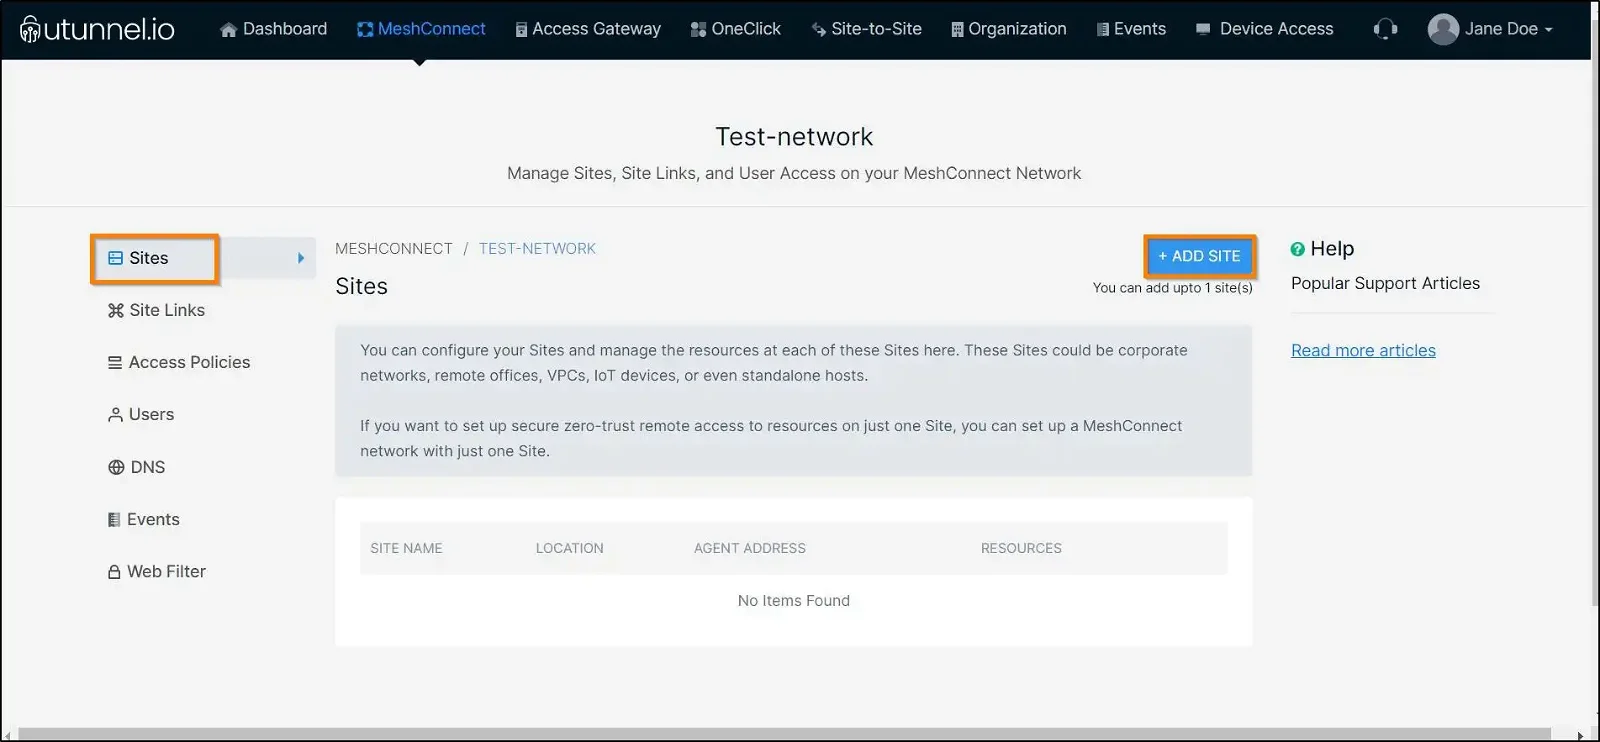 How to configure Sites on a MeshConnect network add site